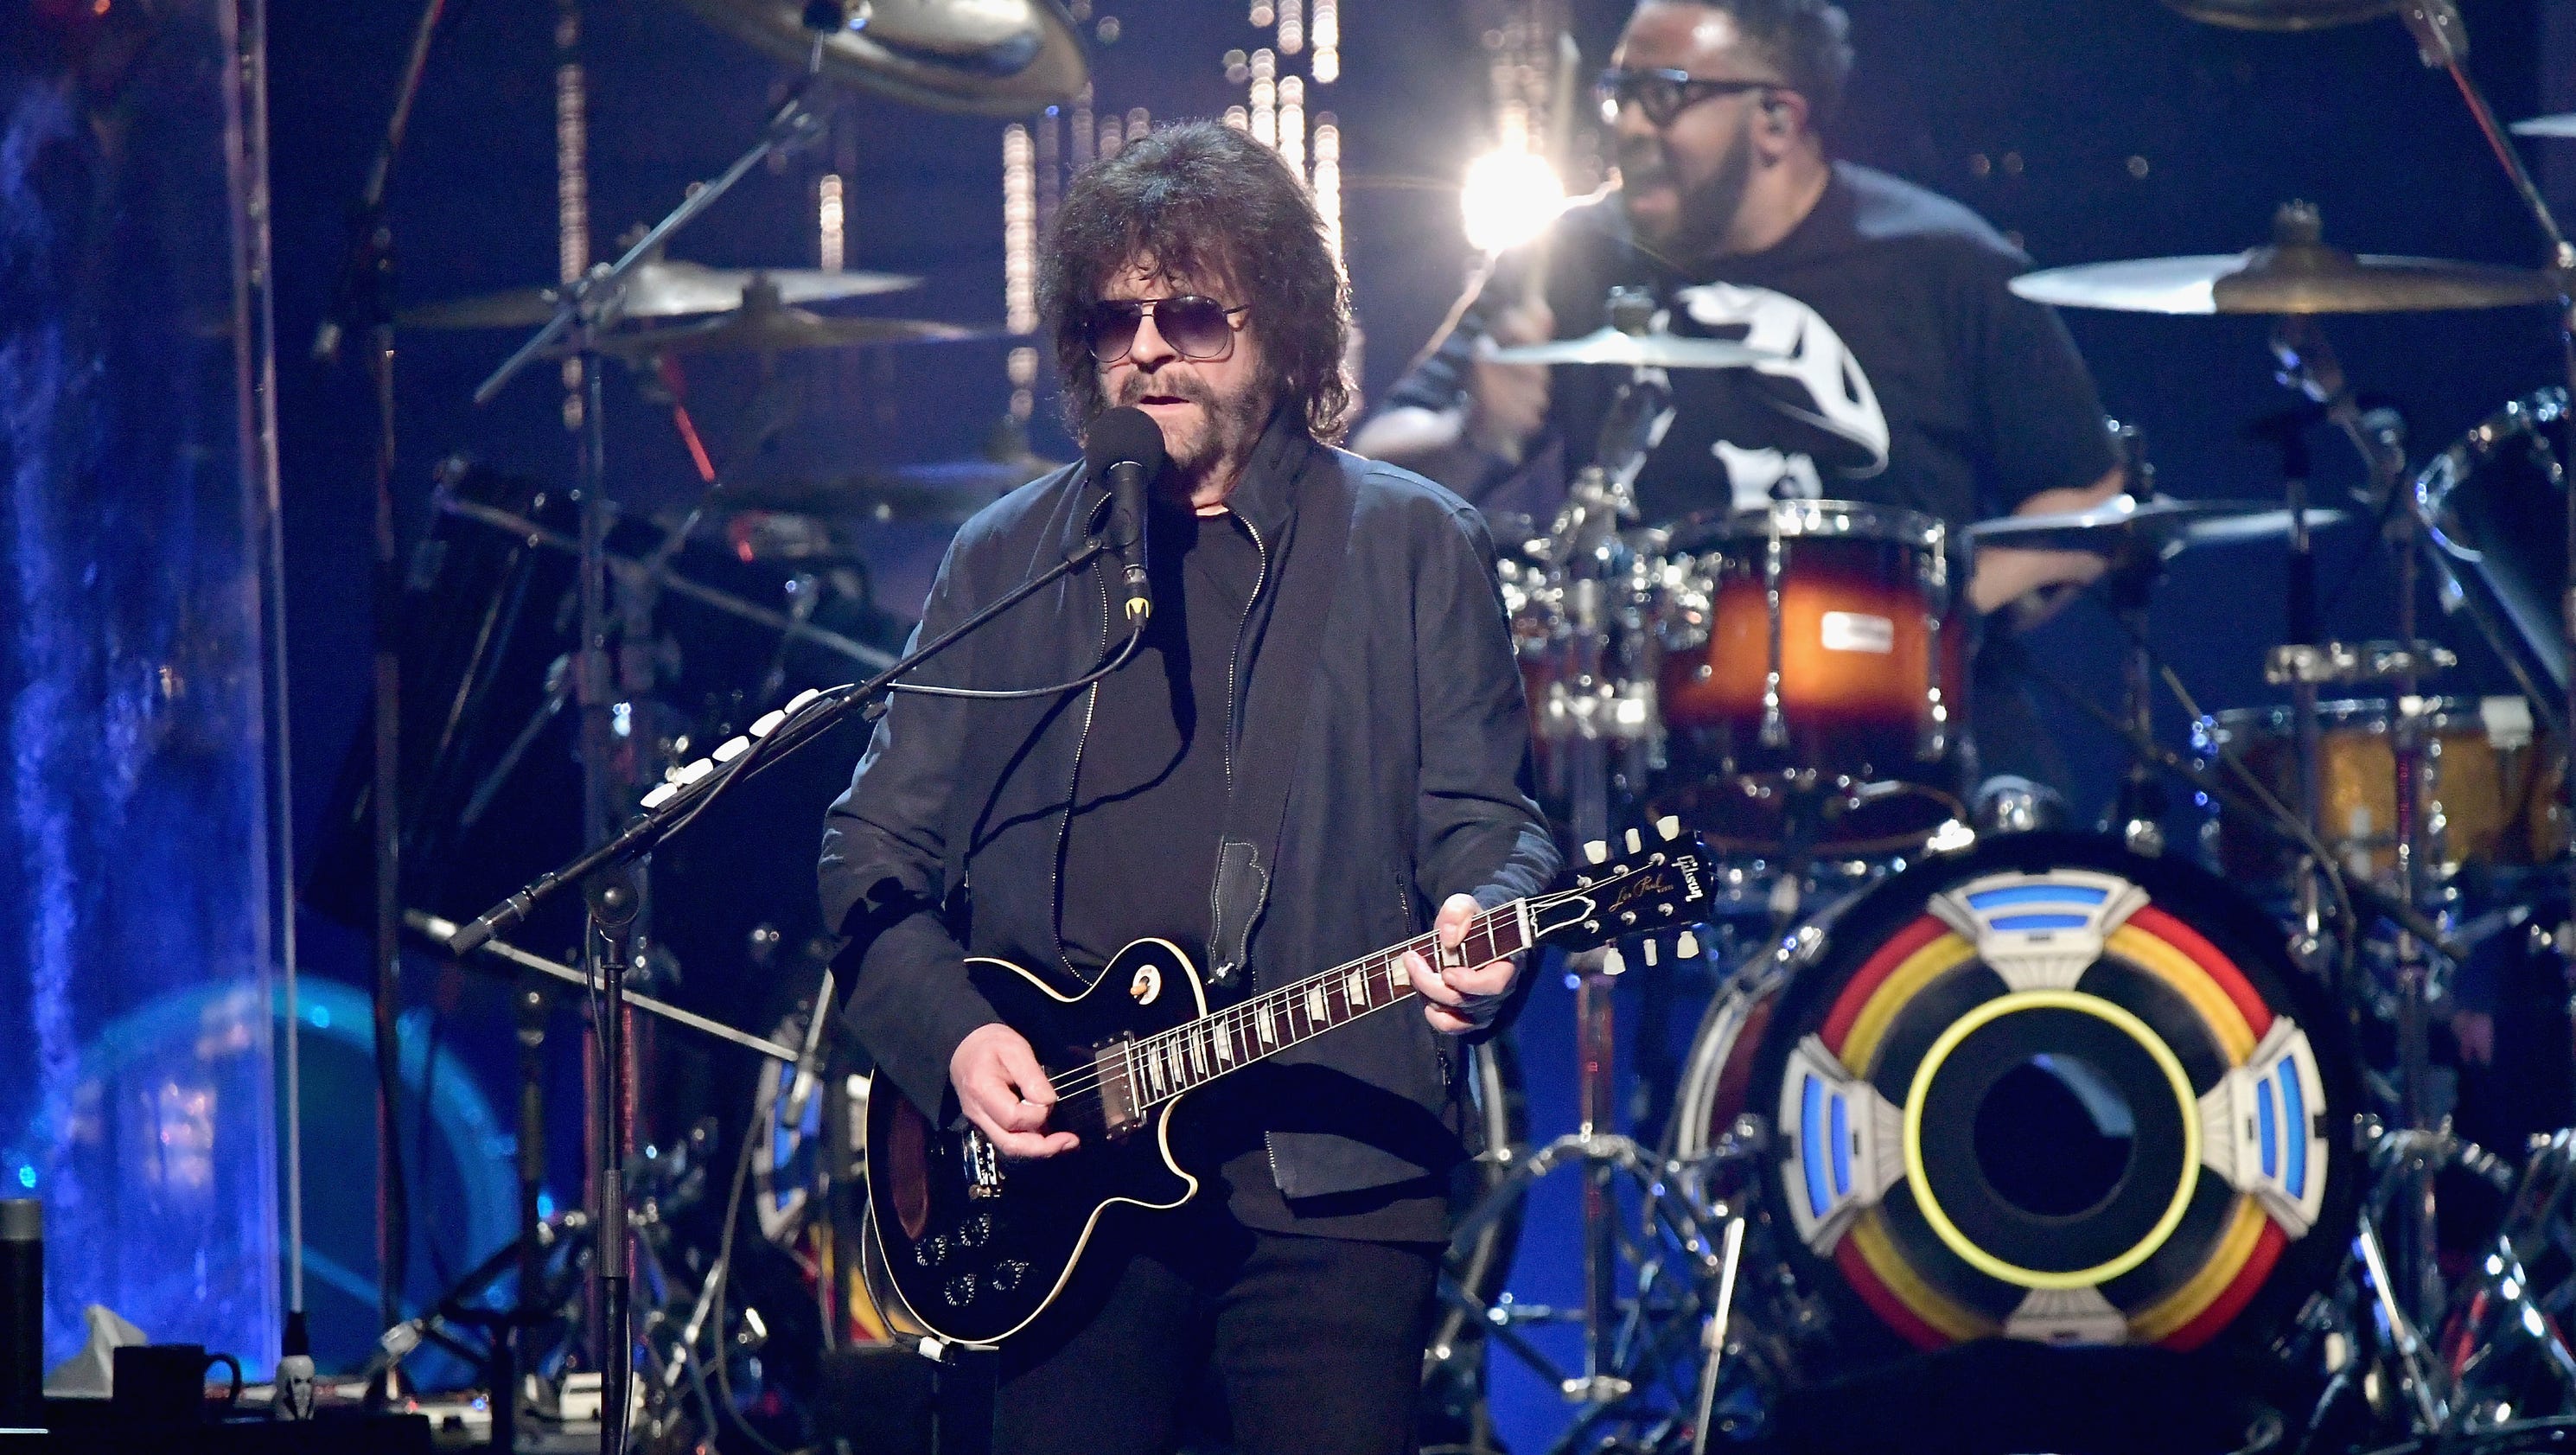 Jeff Lynne's ELO to play first Detroit concert in 37 years